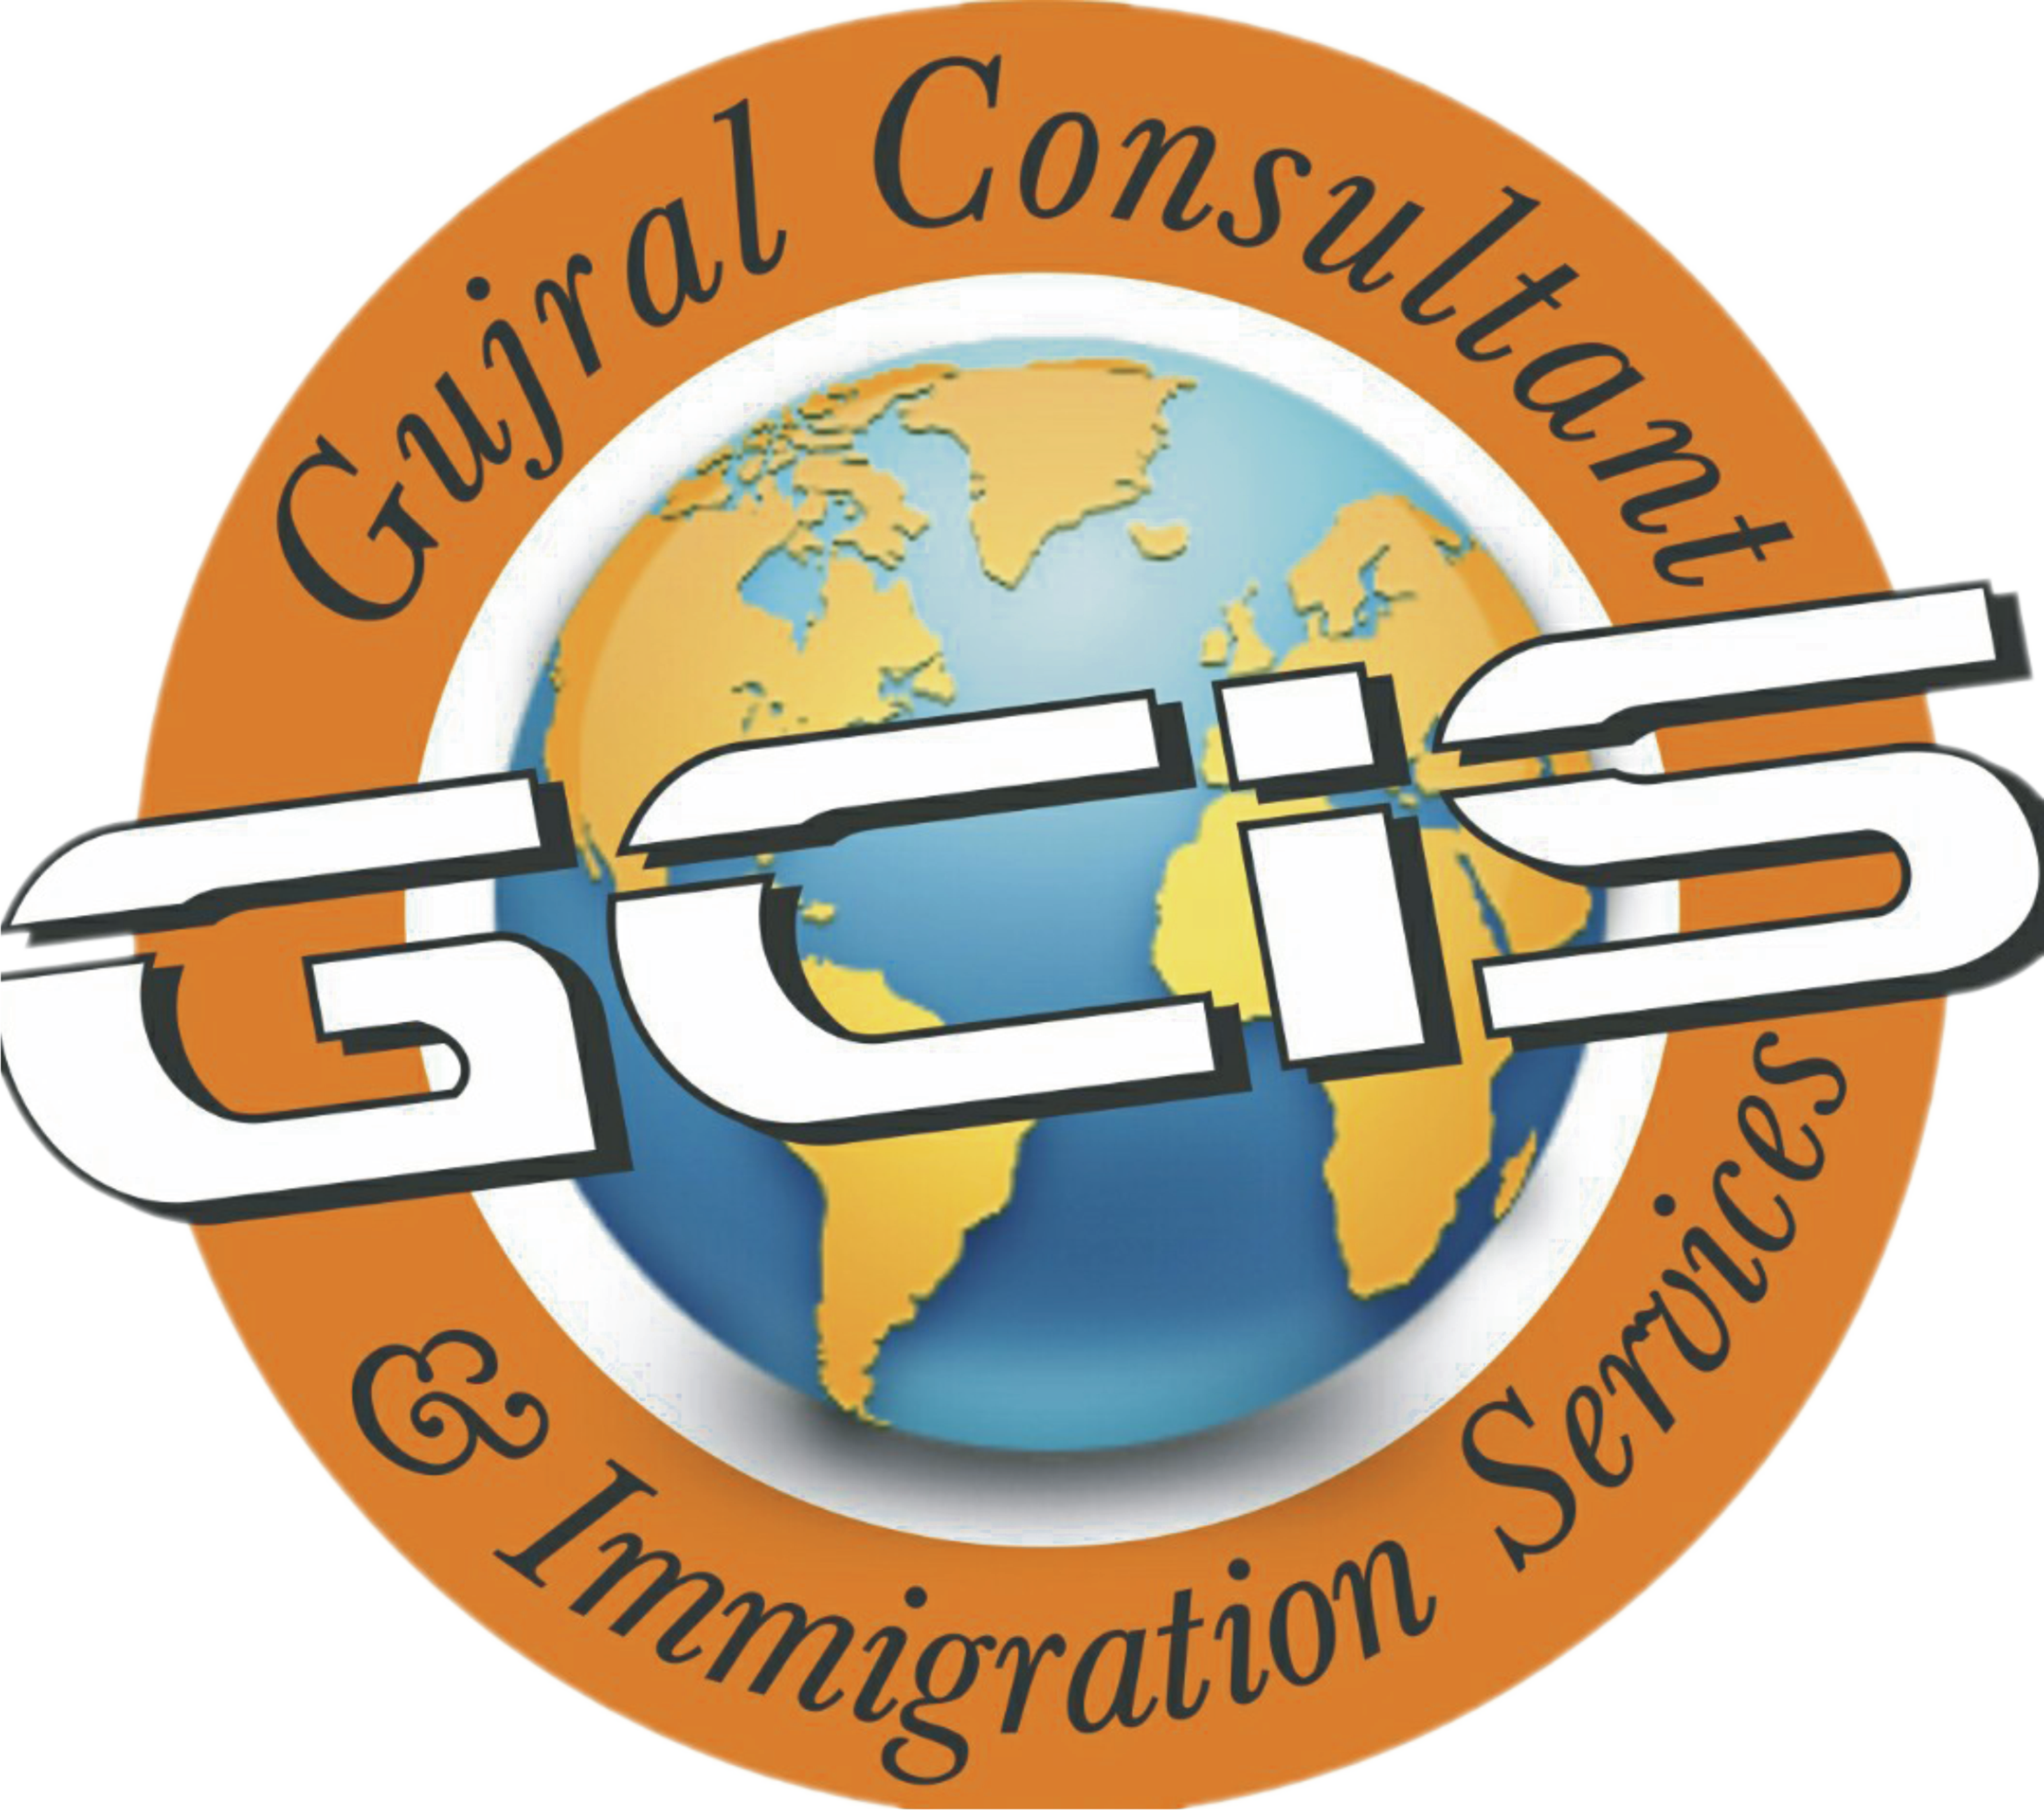 Gujral Consultant & Immigration Services|Accounting Services|Professional Services